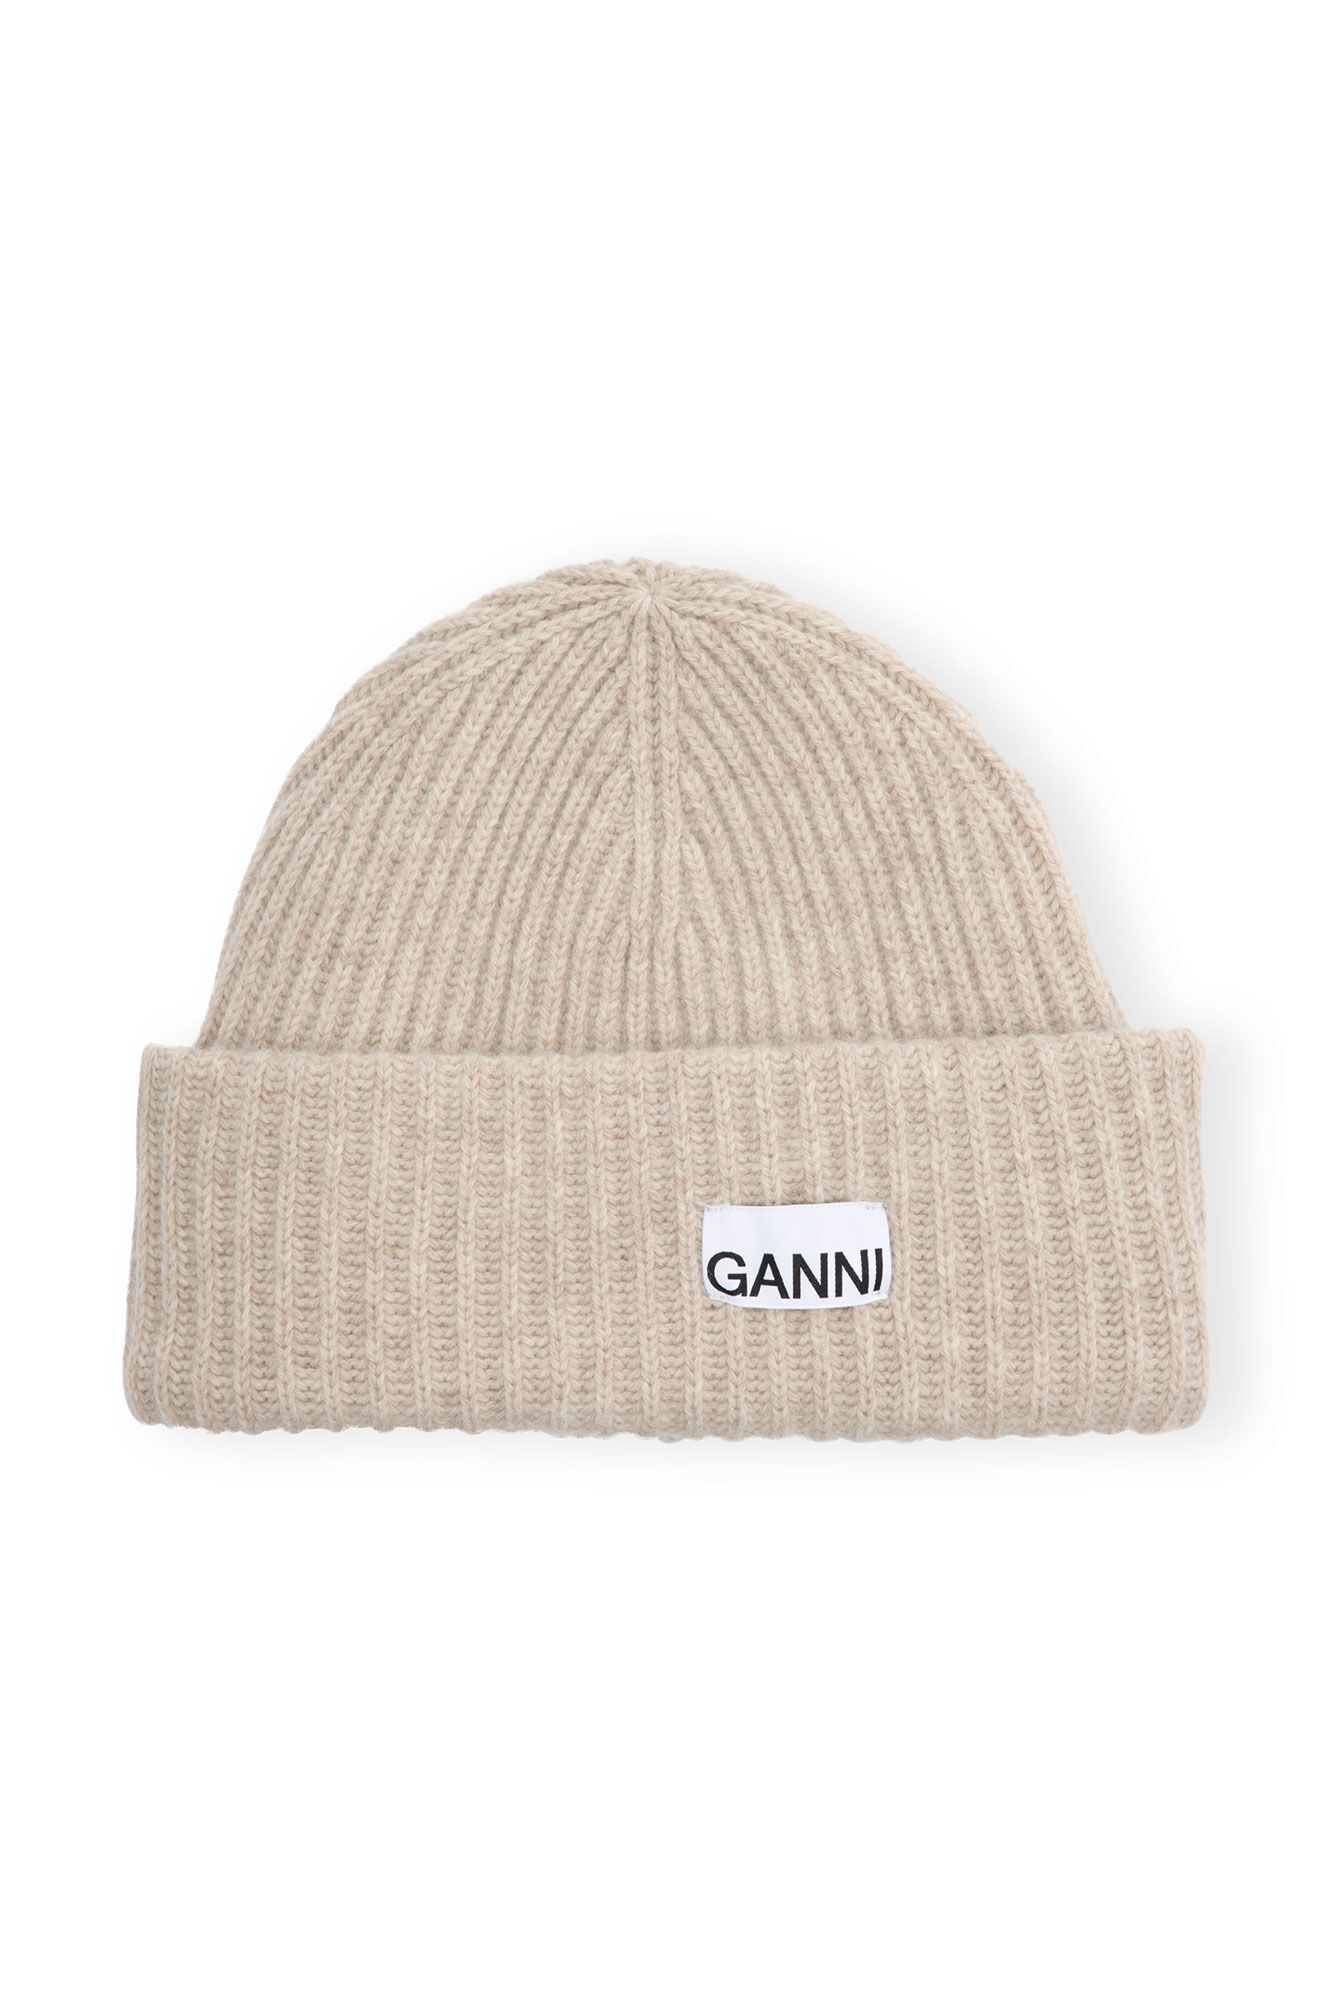 GANNI Collections | Latest Releases & Exclusives | GANNI